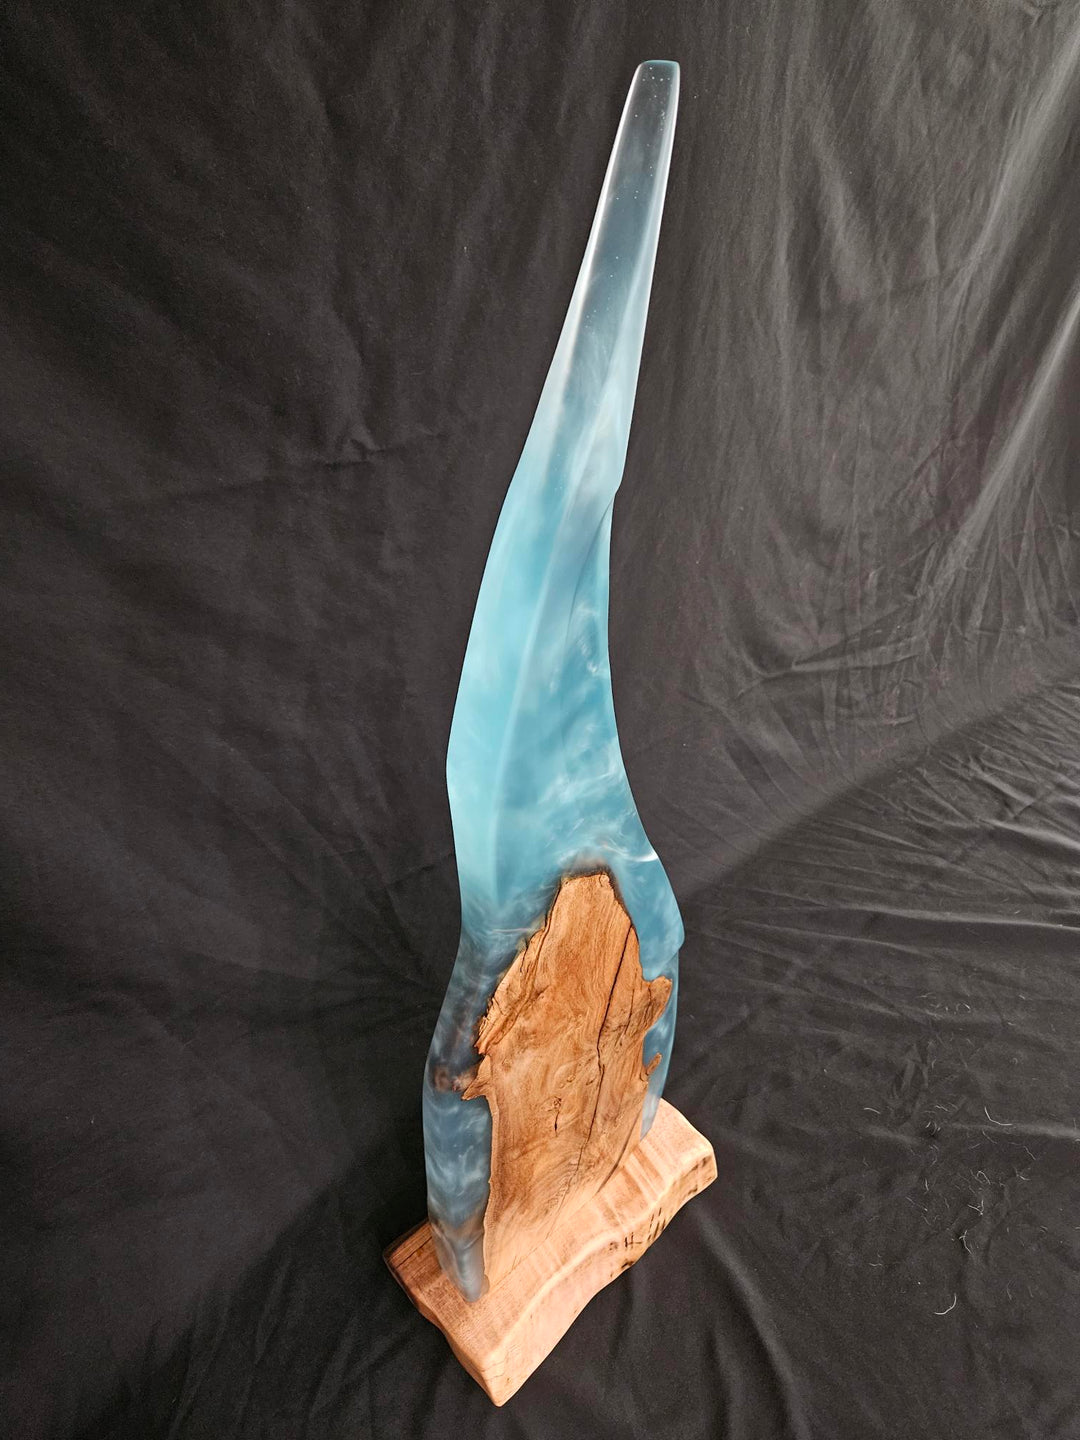 Hybrid burl with turquois swirling epoxy resin sculpture